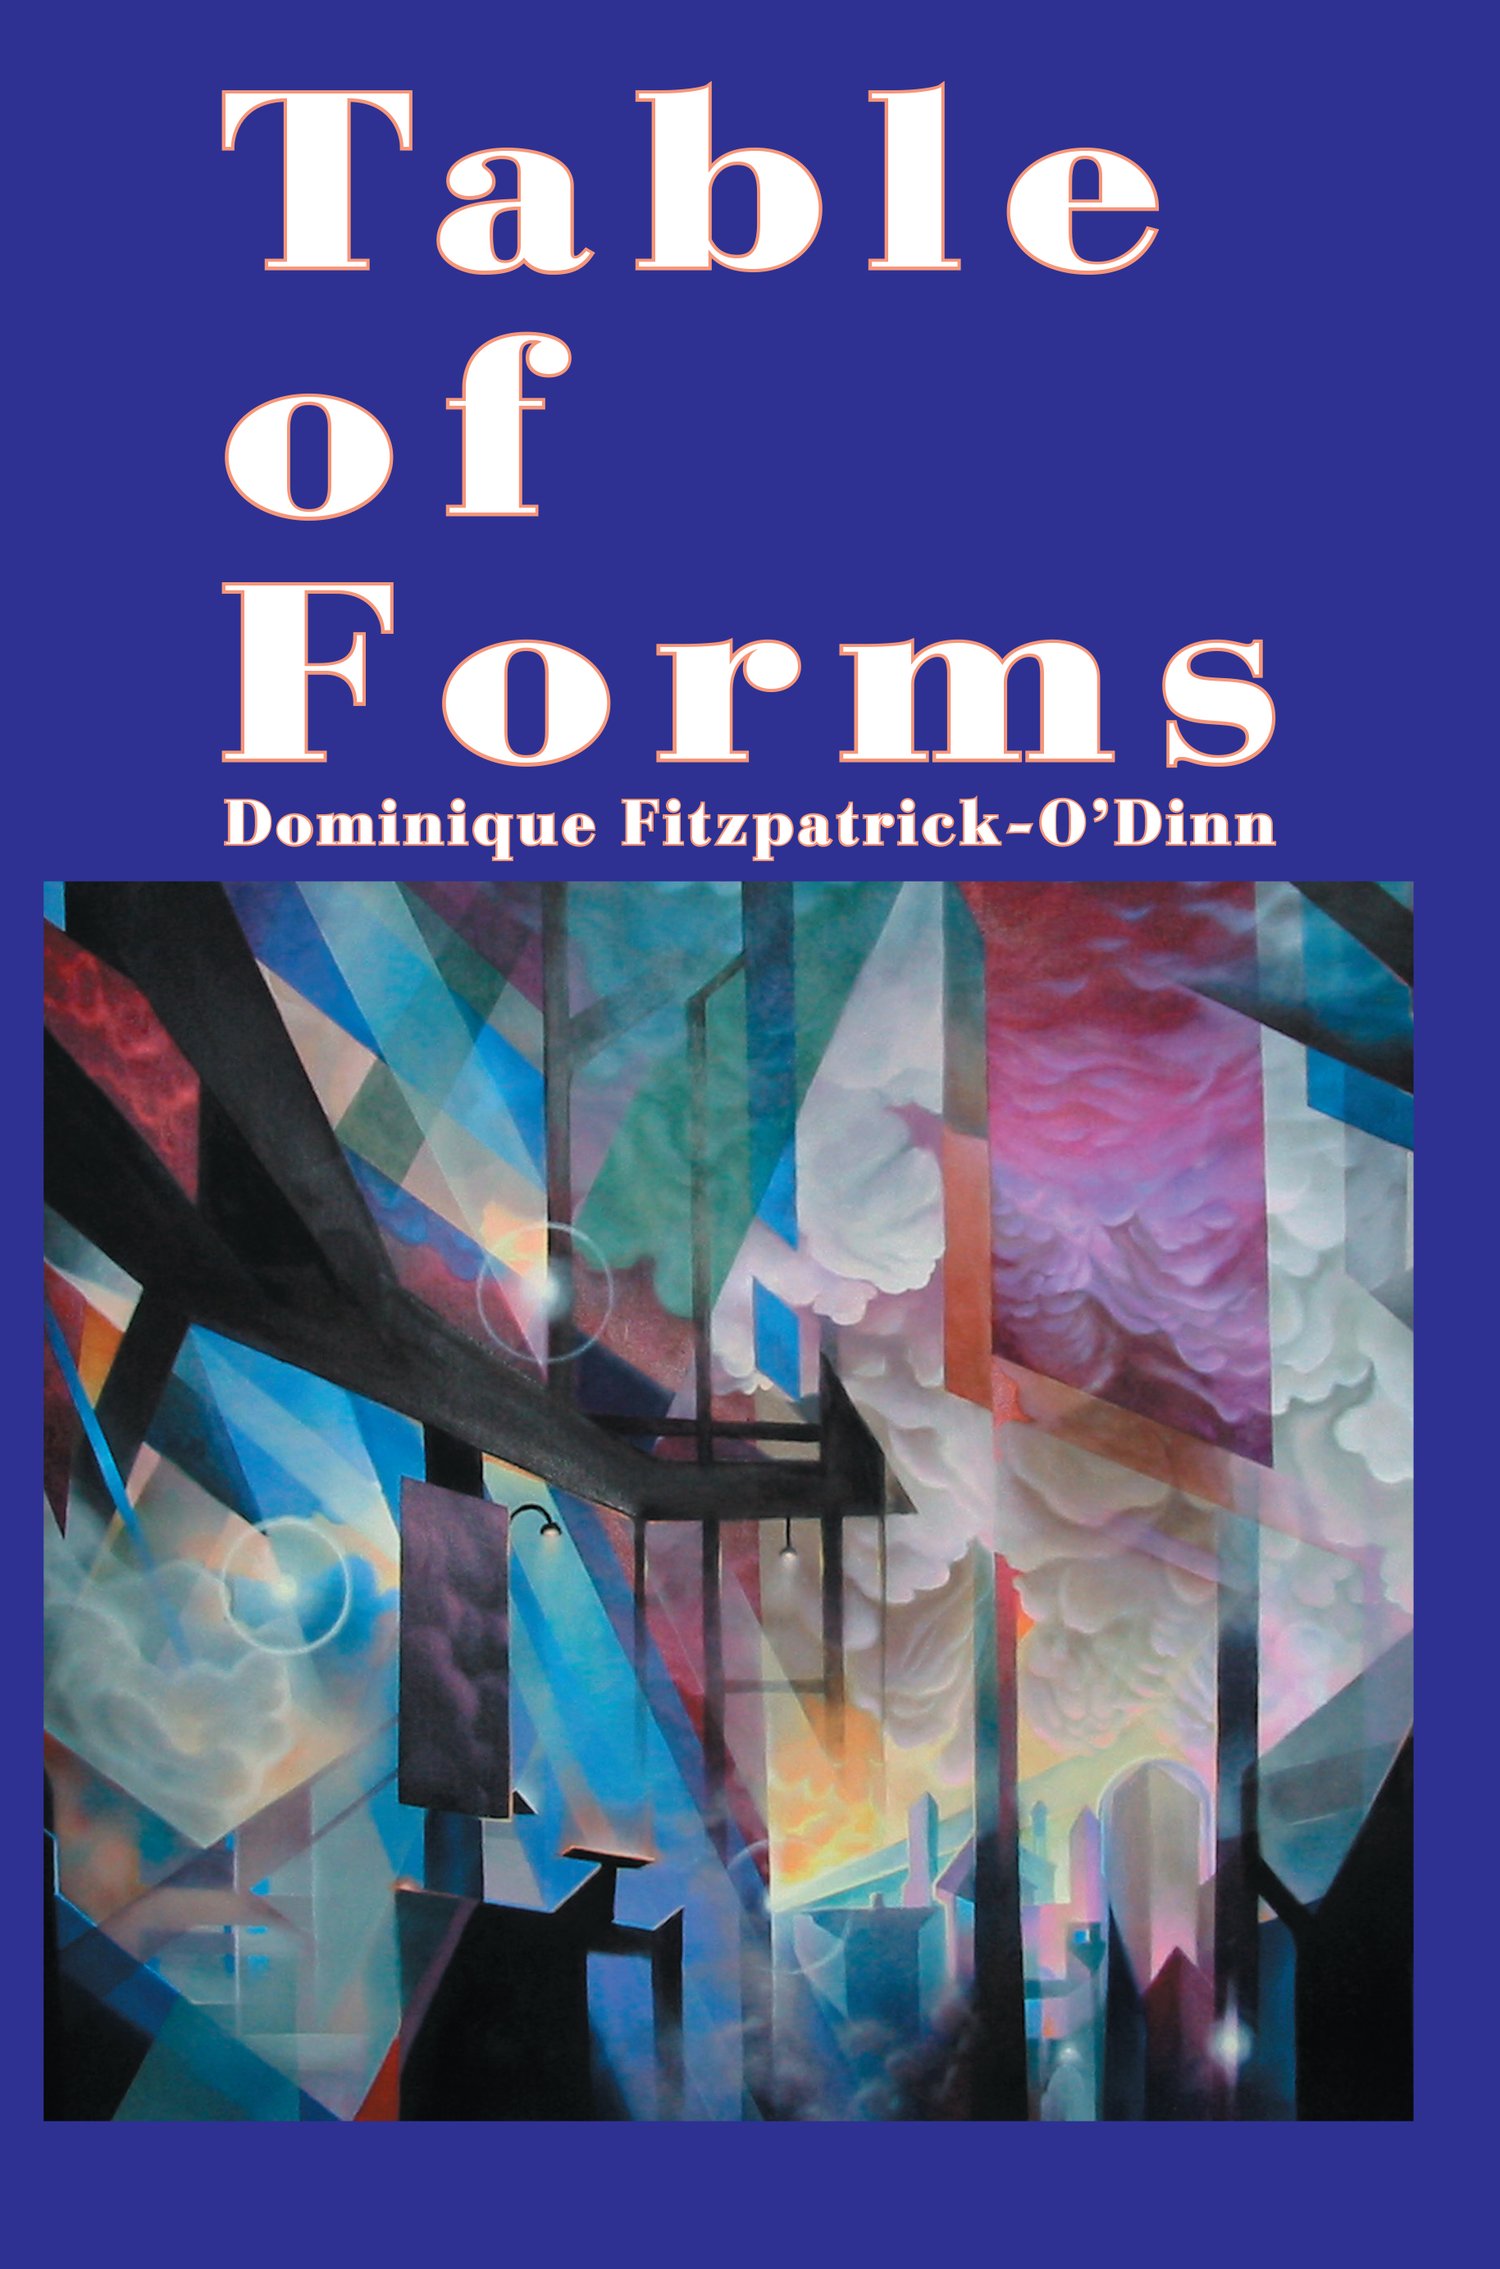 Image of Table of Forms, by Dominique Fitzpatrick-O'Dinn